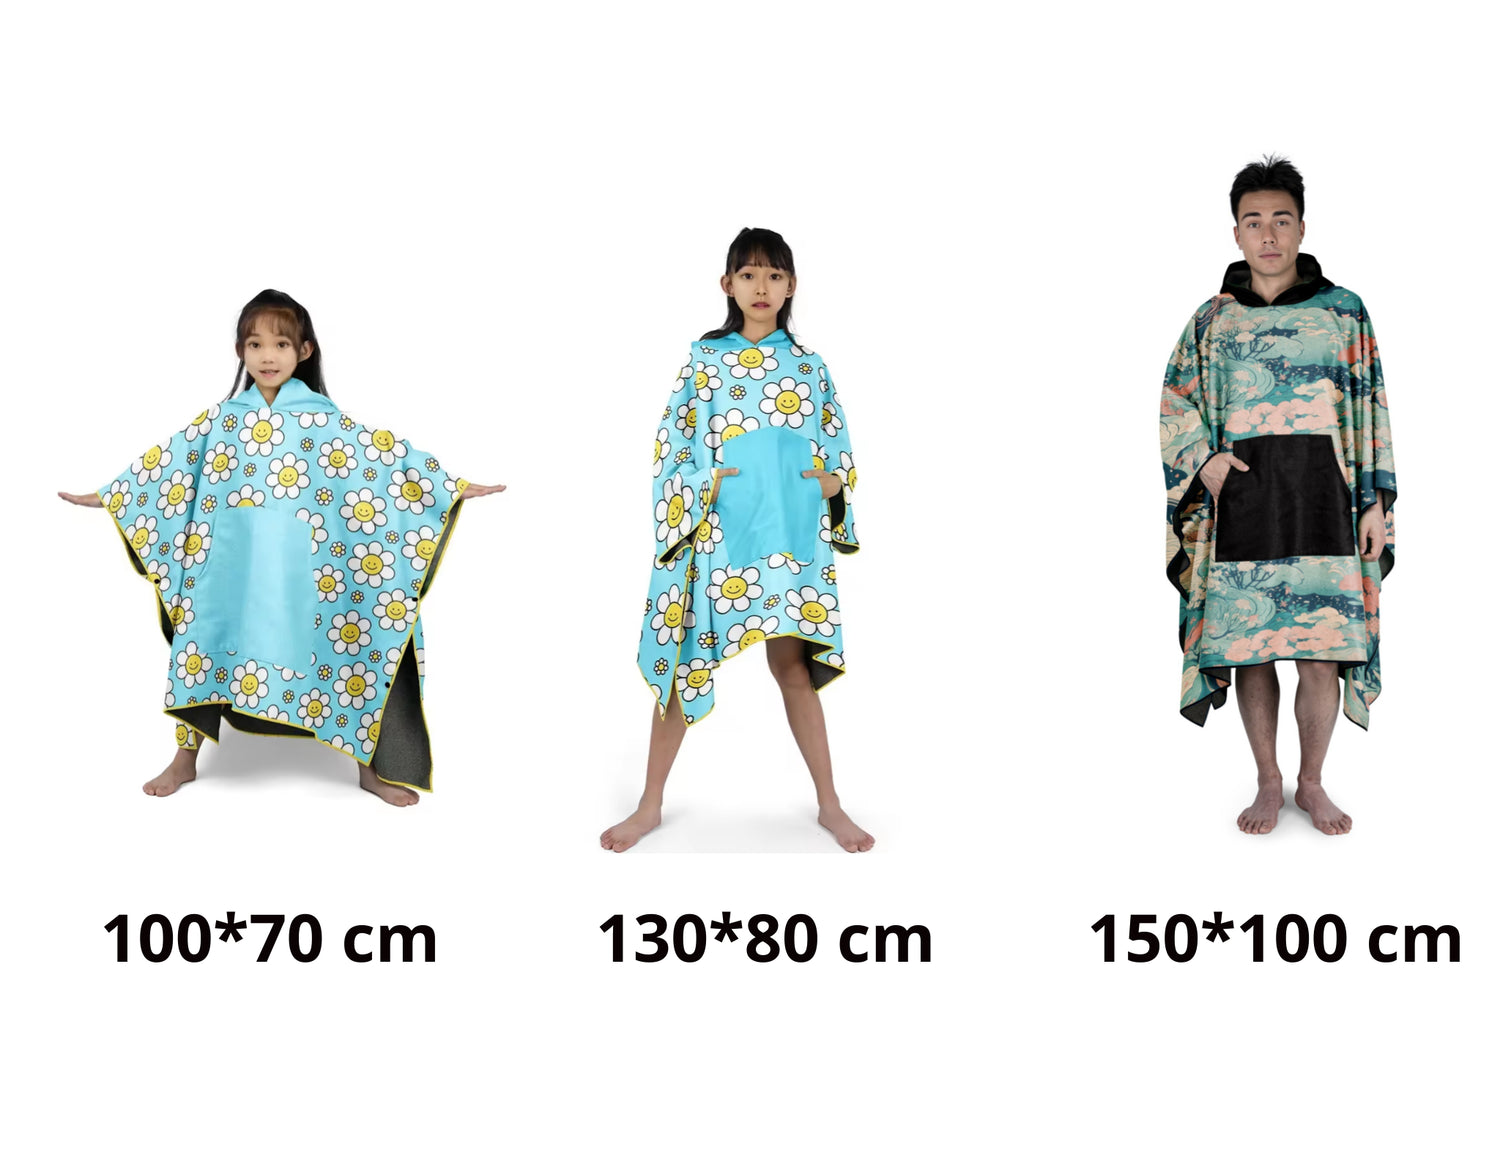 poncho towels for various size options